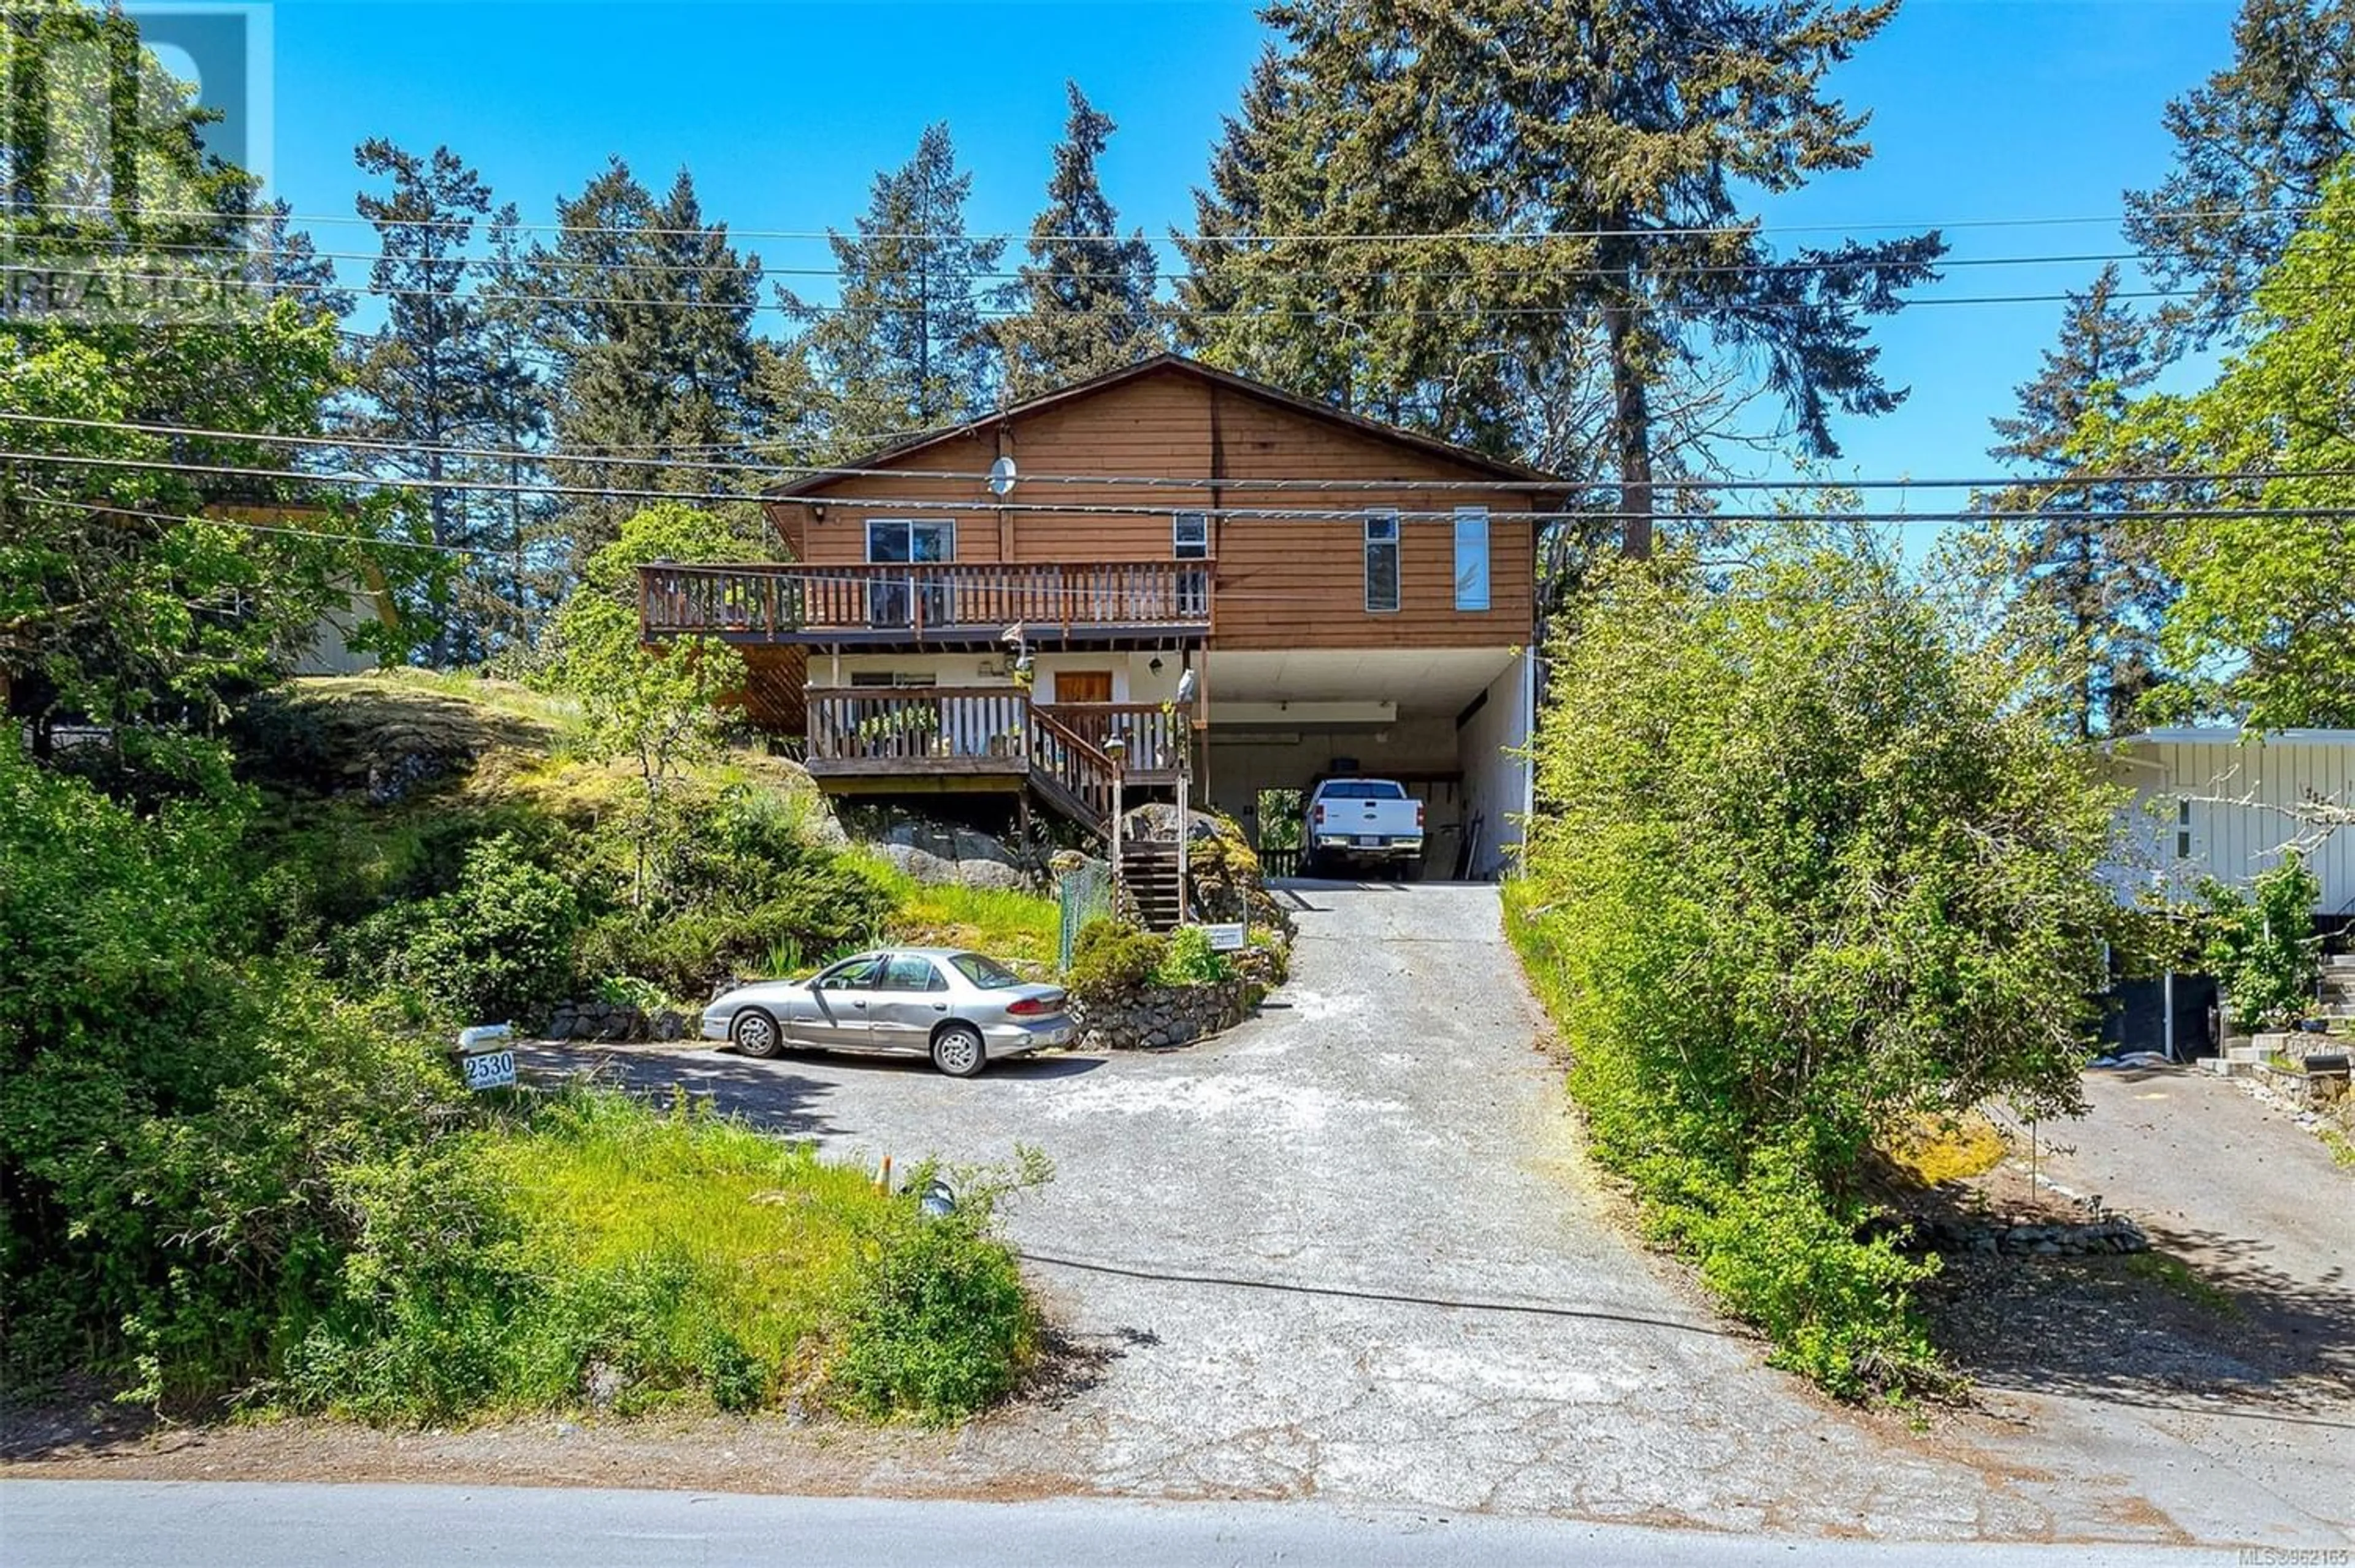 A pic from exterior of the house or condo for 2524 Wentwich Rd, Langford British Columbia V9B3N4